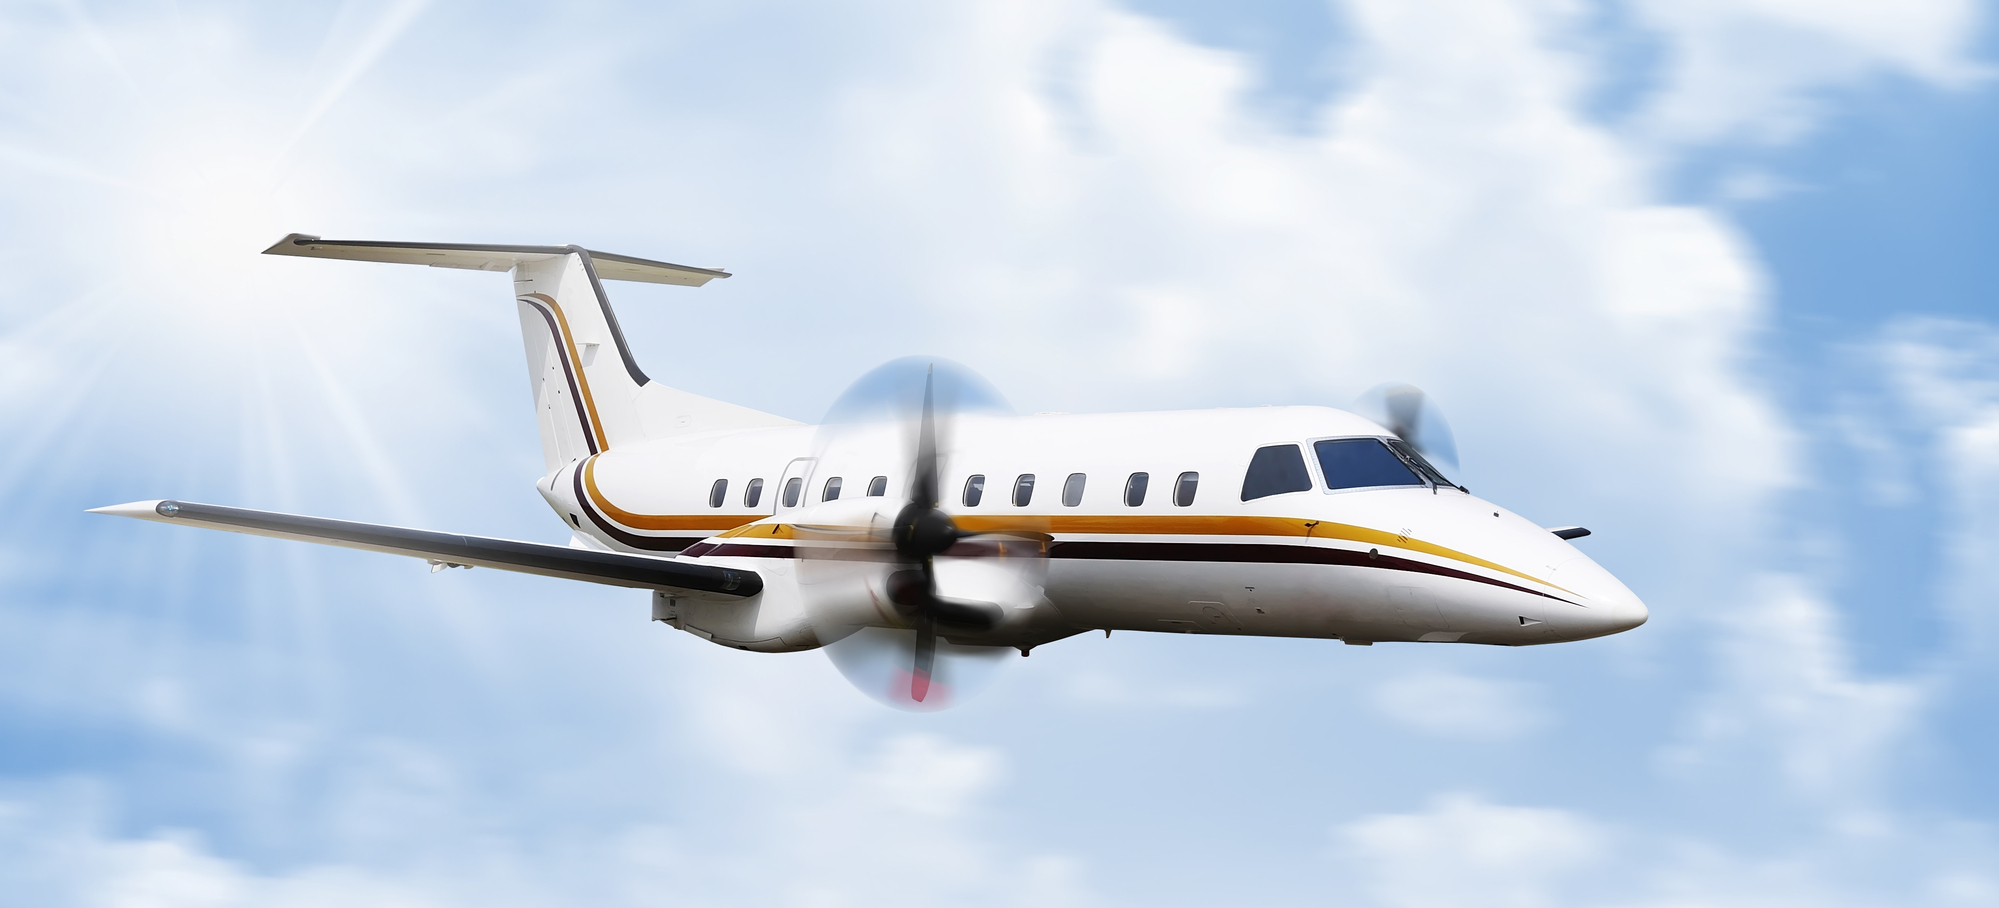 Ninth Circuit Rules FAA’s New Turboprop Procedures Fail to Comply with NEPA